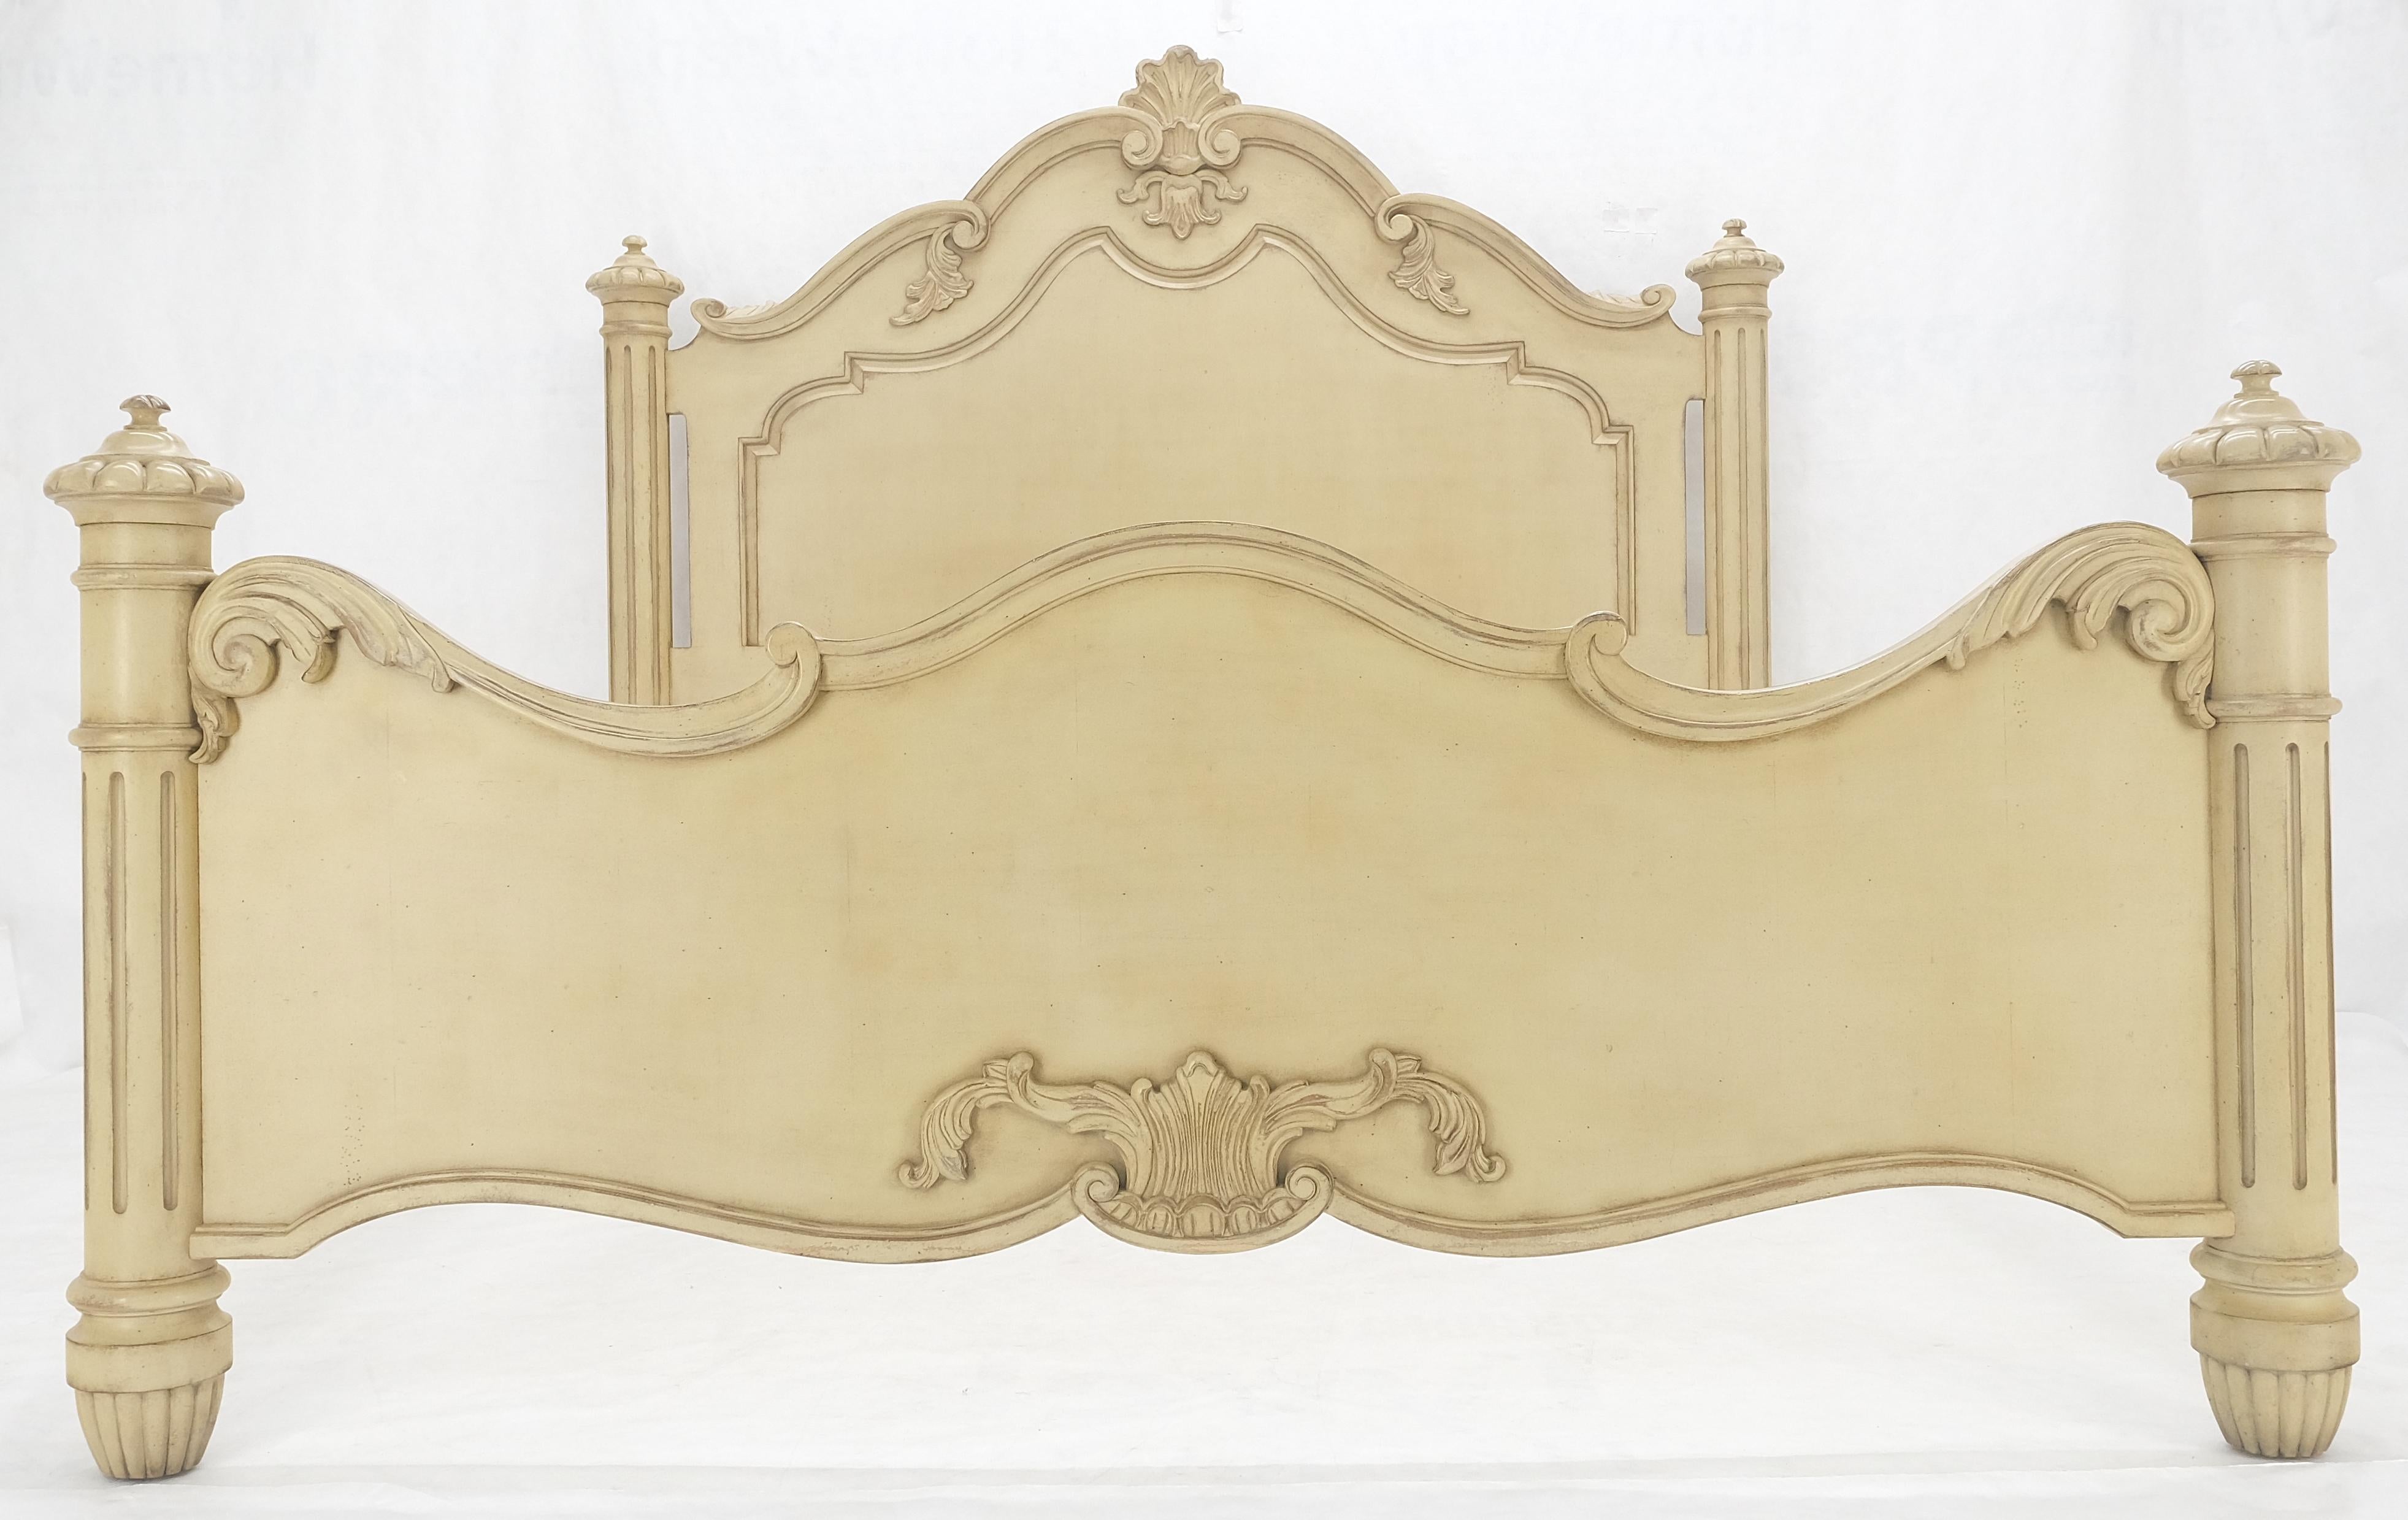 White Wash Pickled Finish Carved Spanish Colonial King Size Bed Headboard MINT In Good Condition For Sale In Rockaway, NJ